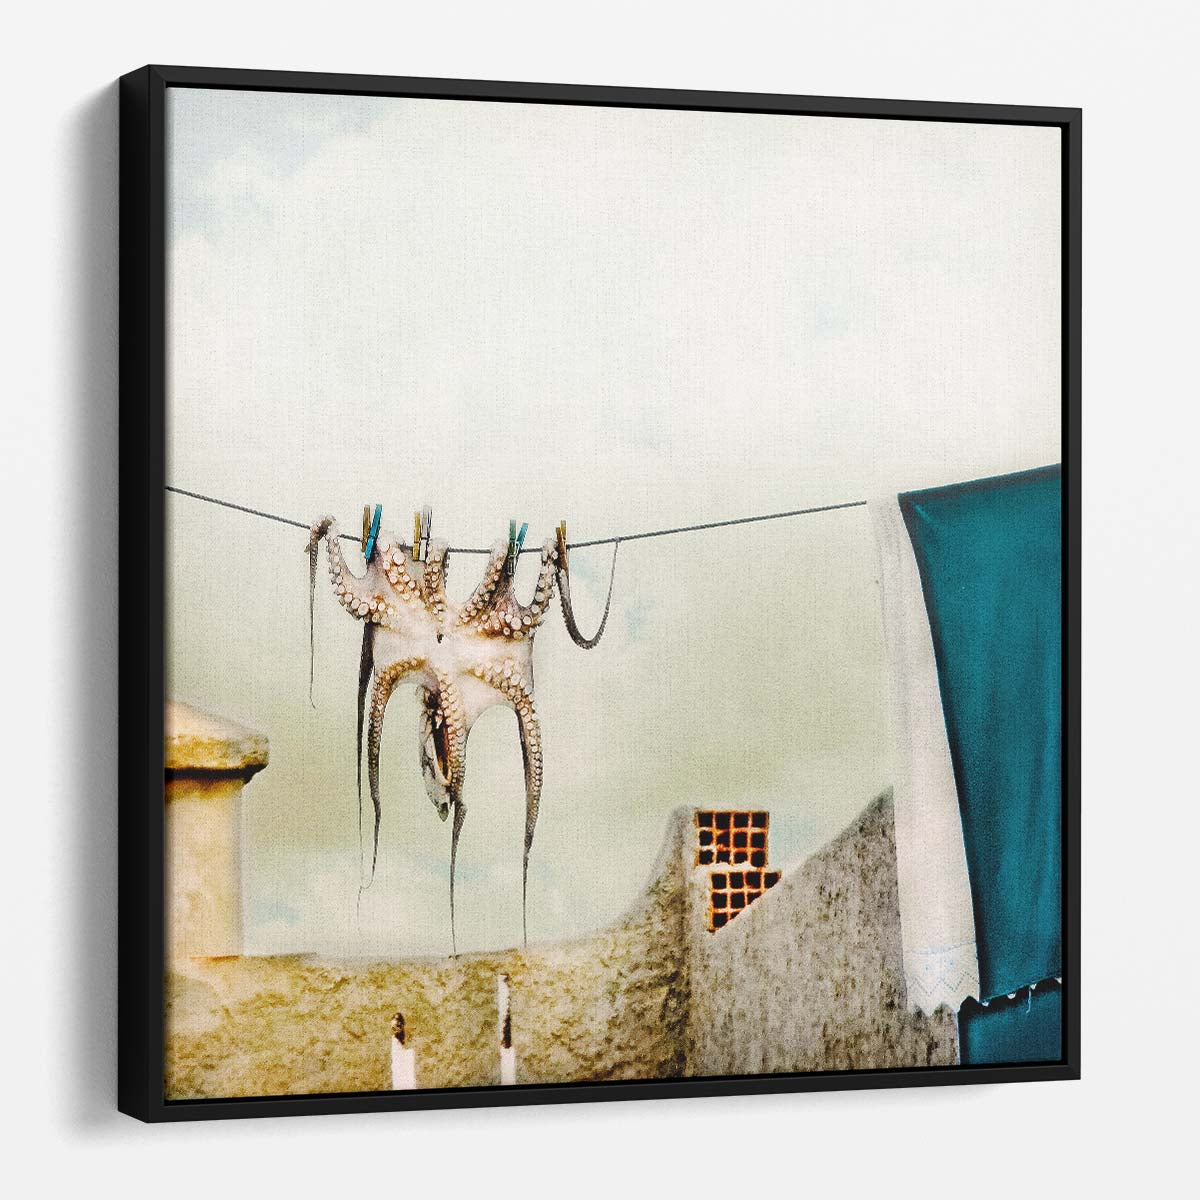 Abstract Octopus Laundry Day Tunisia Wall Art by Luxuriance Designs. Made in USA.